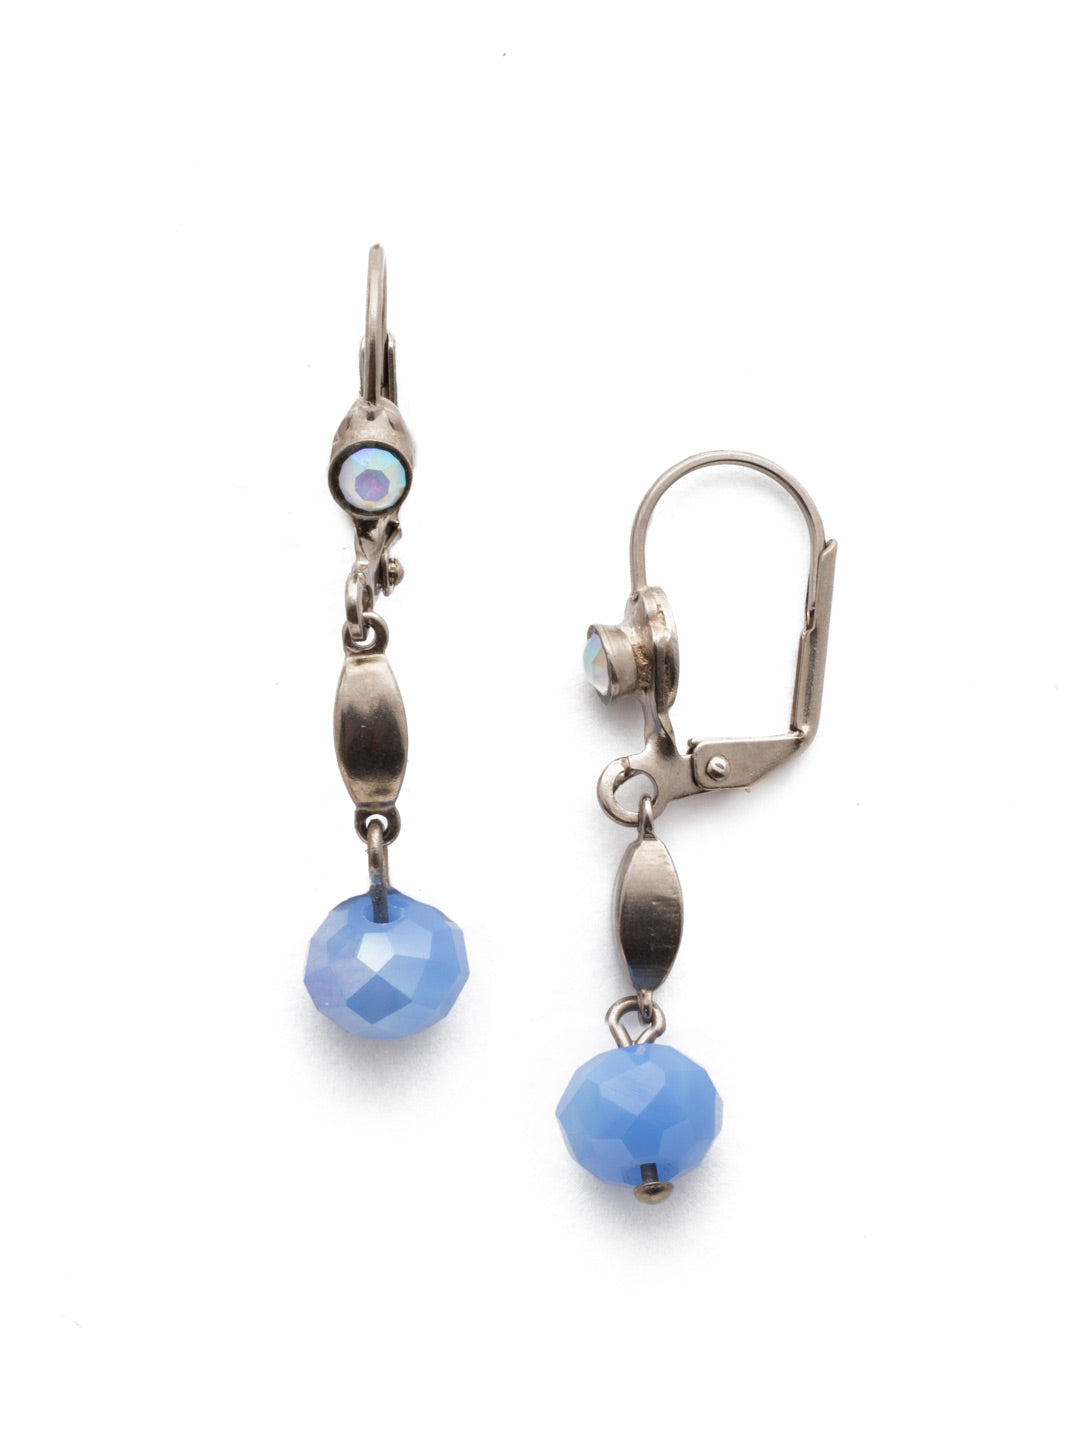 Marjorie Drop Earring - EEF35ASGLC - <p>A single orb dangles from theses alluring drop earrings with a singular round crystal atop. Backed by a lever-back closure these can be styled simplicity or sophisticated. From Sorrelli's Glacier collection in our Antique Silver-tone finish.</p>